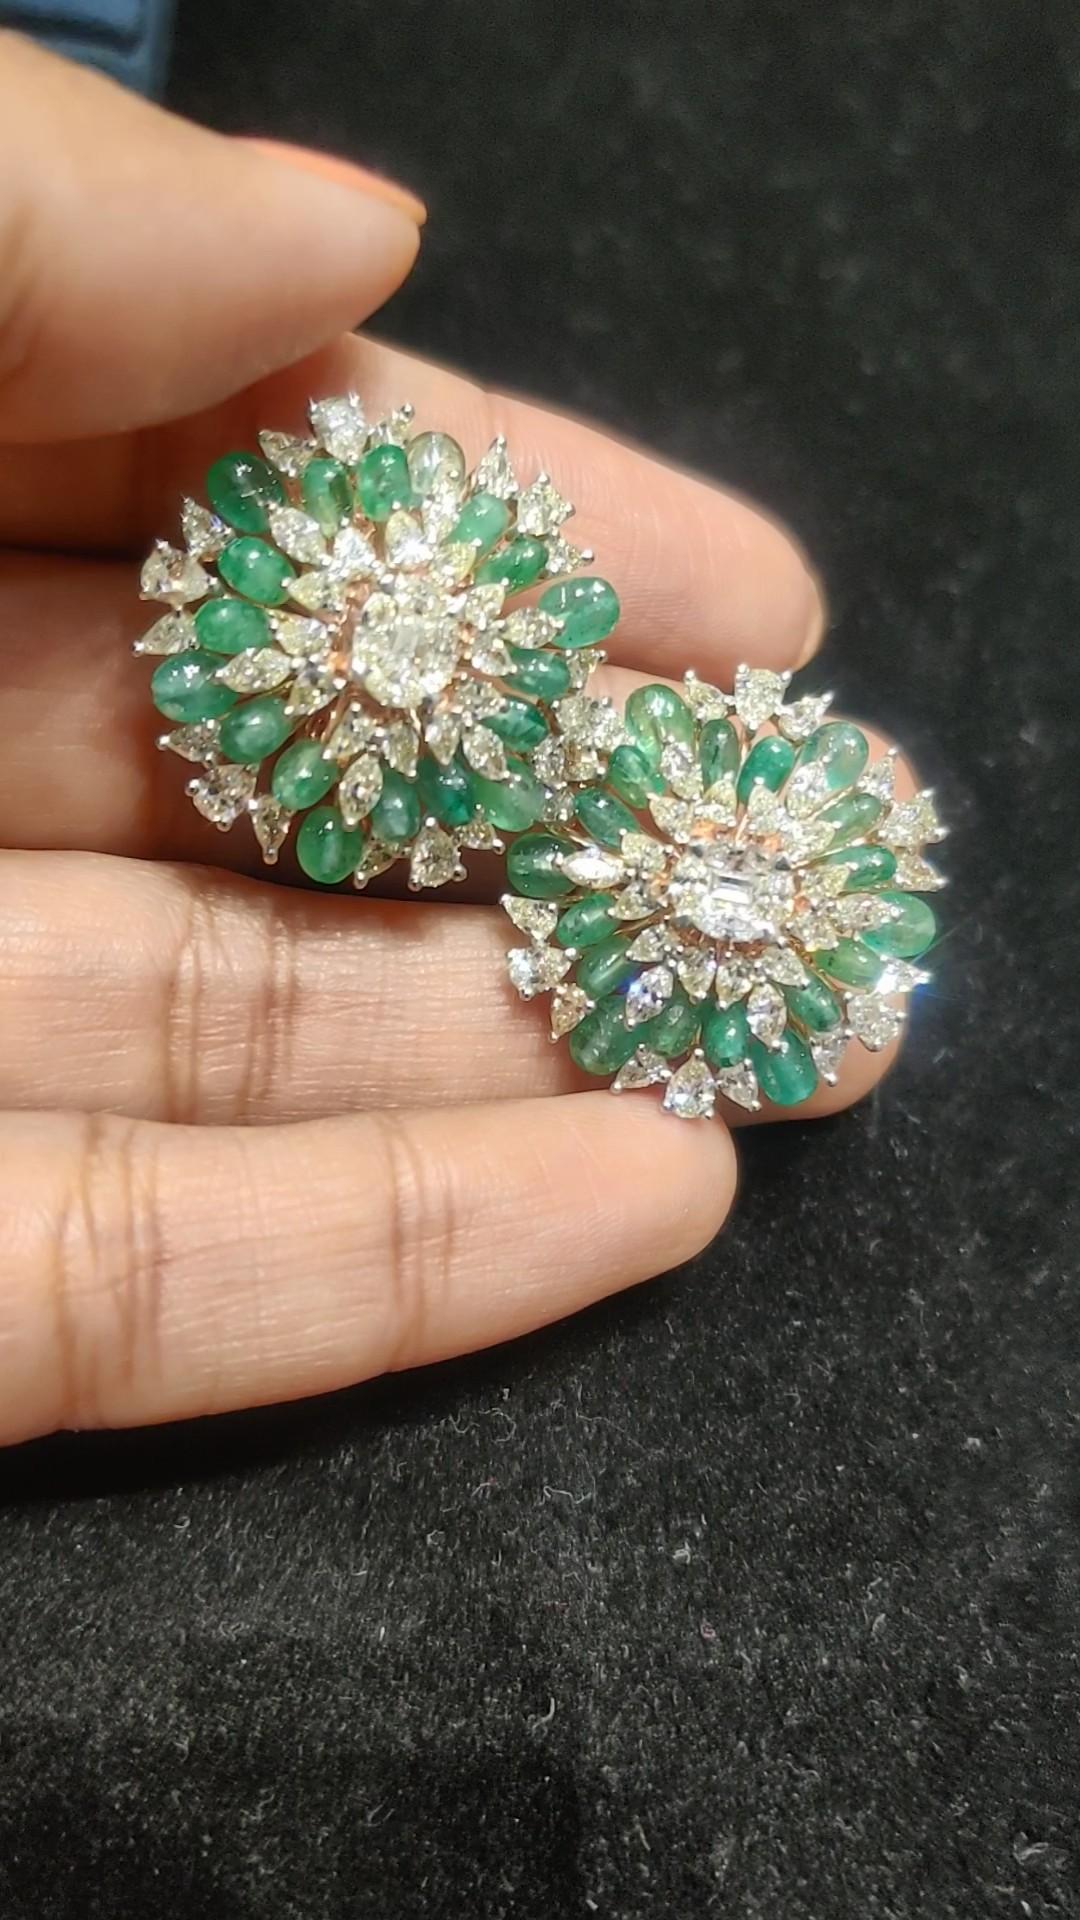 Diamond - 5.20 carats
Emerald - 10.40 carats
Gold - 13.365 Gms
Item code - 

When royalty meets elegant classics 
These beautiful Emerald and diamond studs are a perfect match for a dressy to casual sober look